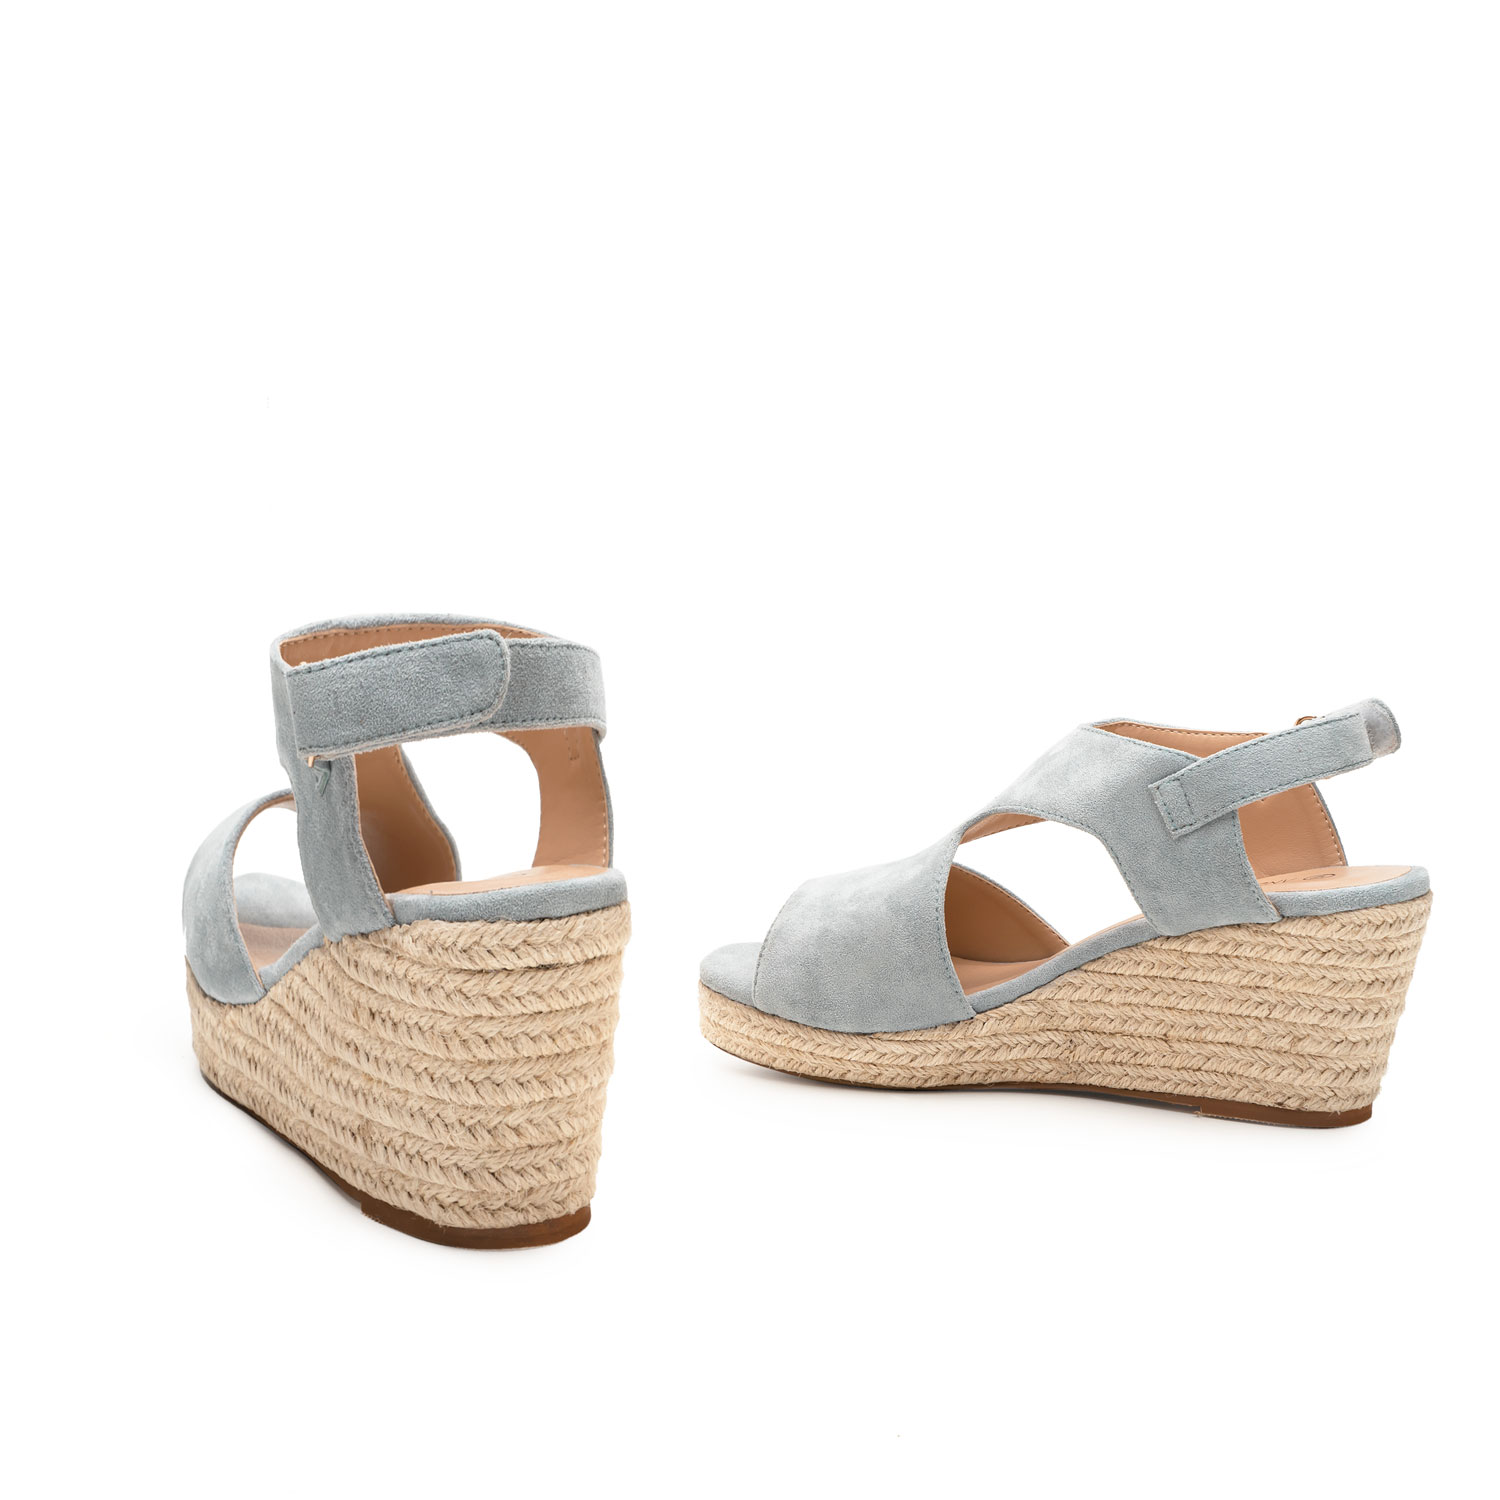 Light Blue Faux Suede Espadrilles with Jute Wedge 